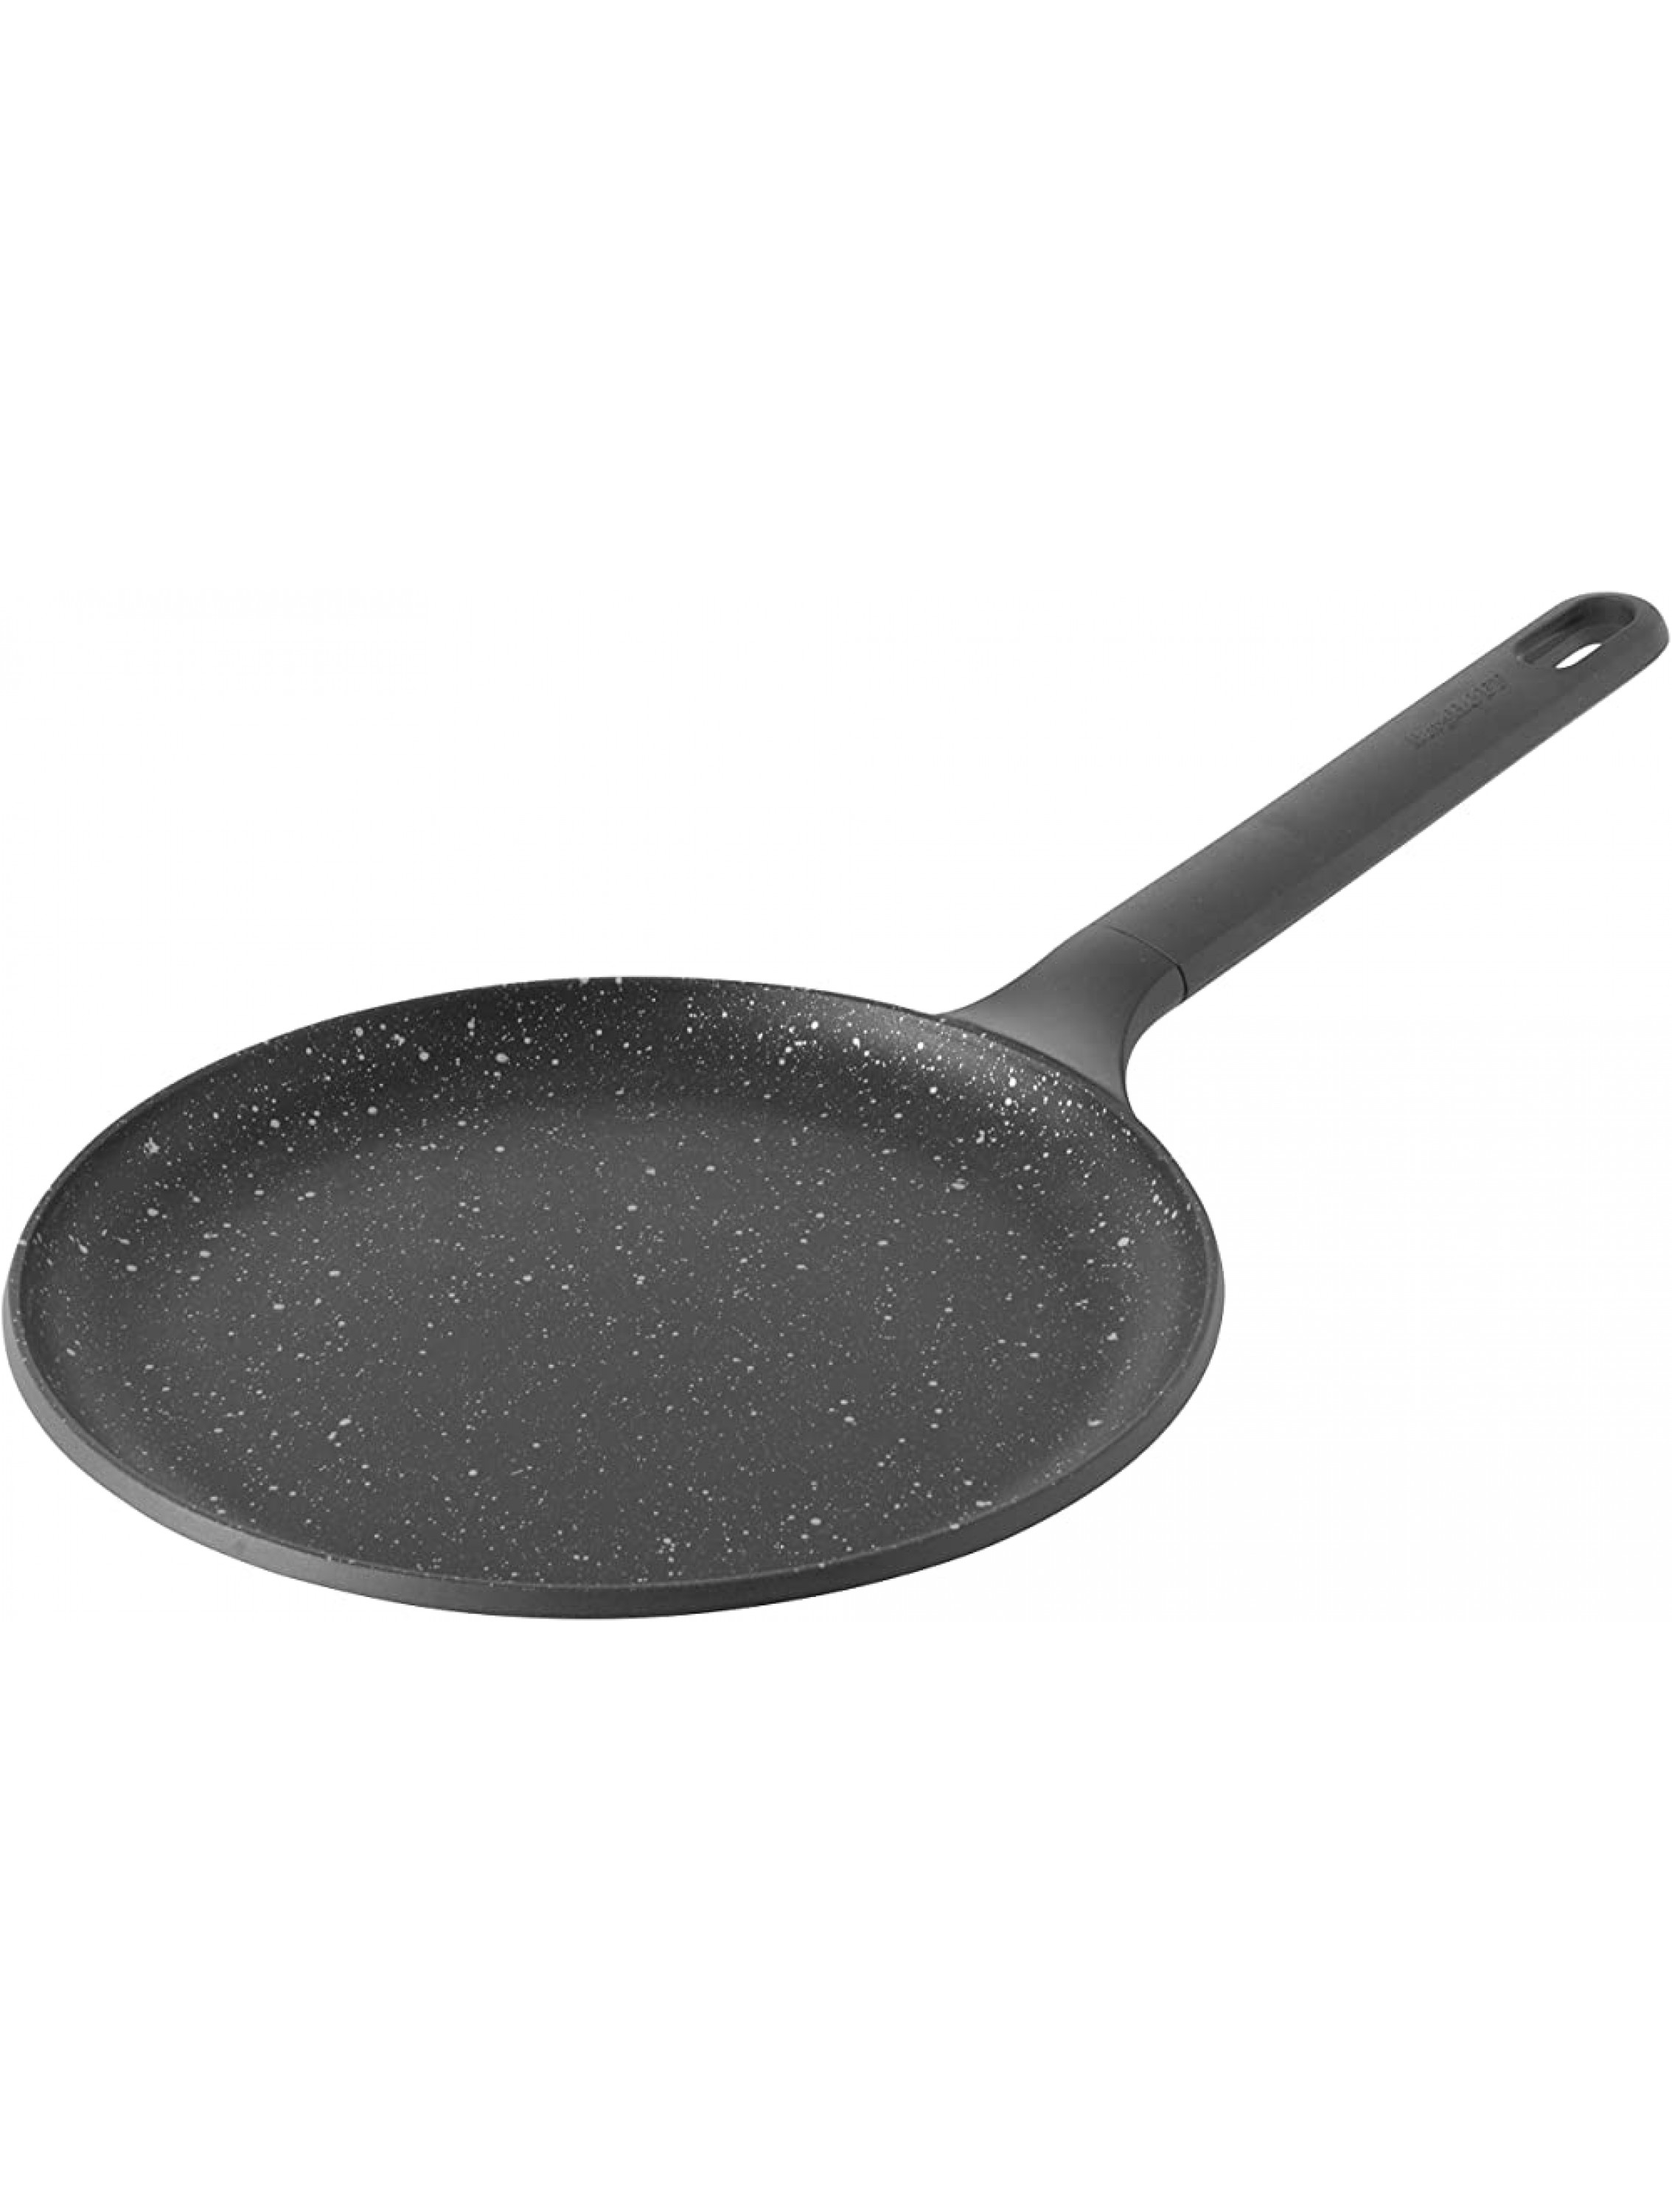 Berghoff GEM Non-Stick Cast Aluminum Pancake Pan 10 0.53 qt. Black Ferno-Green PFOA Free Coating Stay-Cool Handle Hanging Loop Induction Cooktop Fast Heating Cold Grip System - B2ZDX27HO